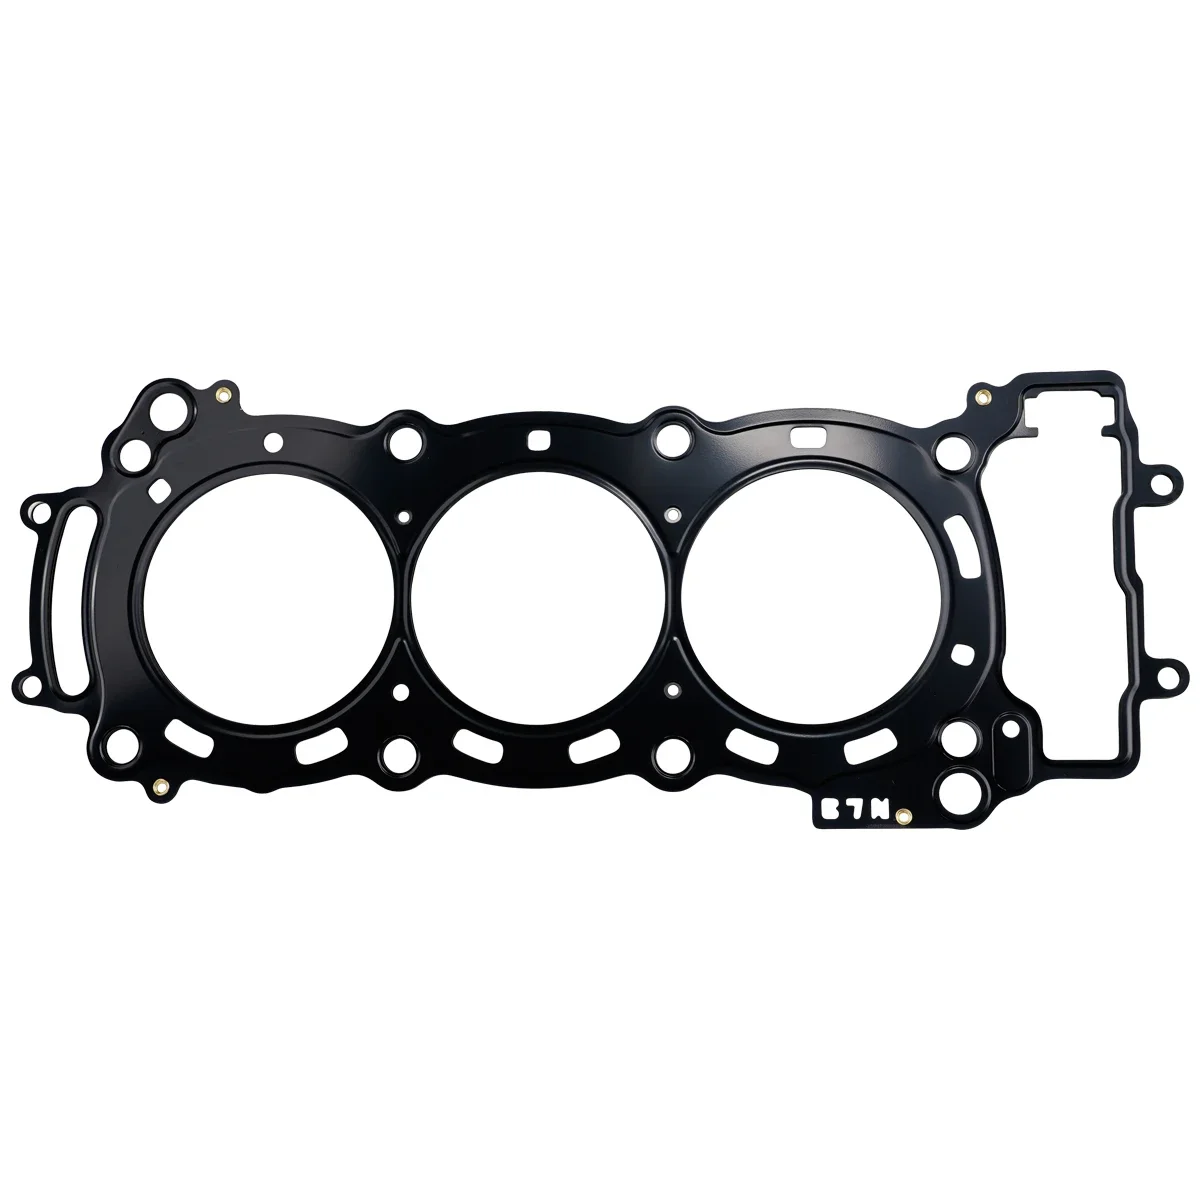 

Motorcycle Cylinder Head Gasket For Yamaha MT09 MT-09 2021-2023 tracer 900 GT 2021-2024 XSR900 2022 B7N-11181-00